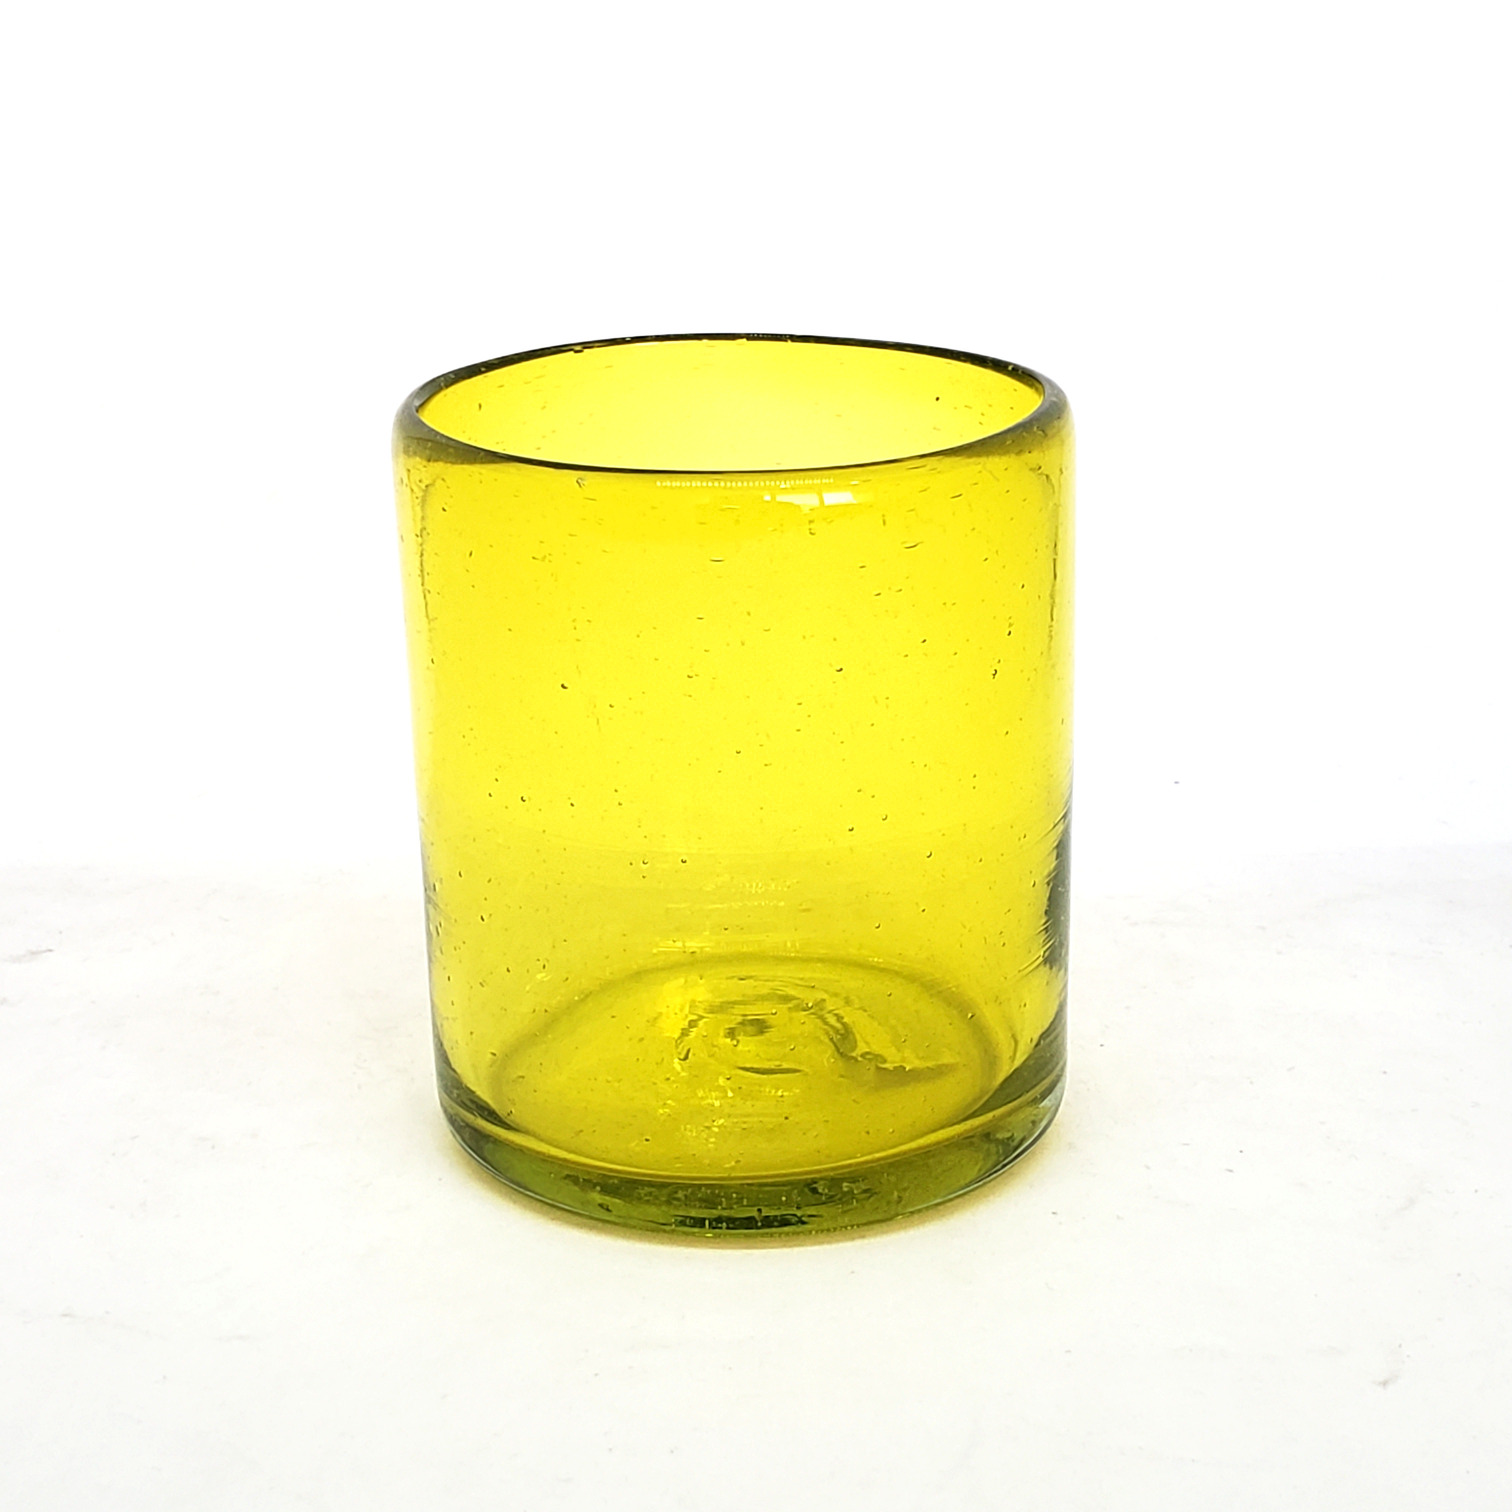 Wholesale Mexican Glasses / Solid Yellow 9 oz Short Tumblers  / Enhance your favorite drink with these colorful handcrafted glasses.